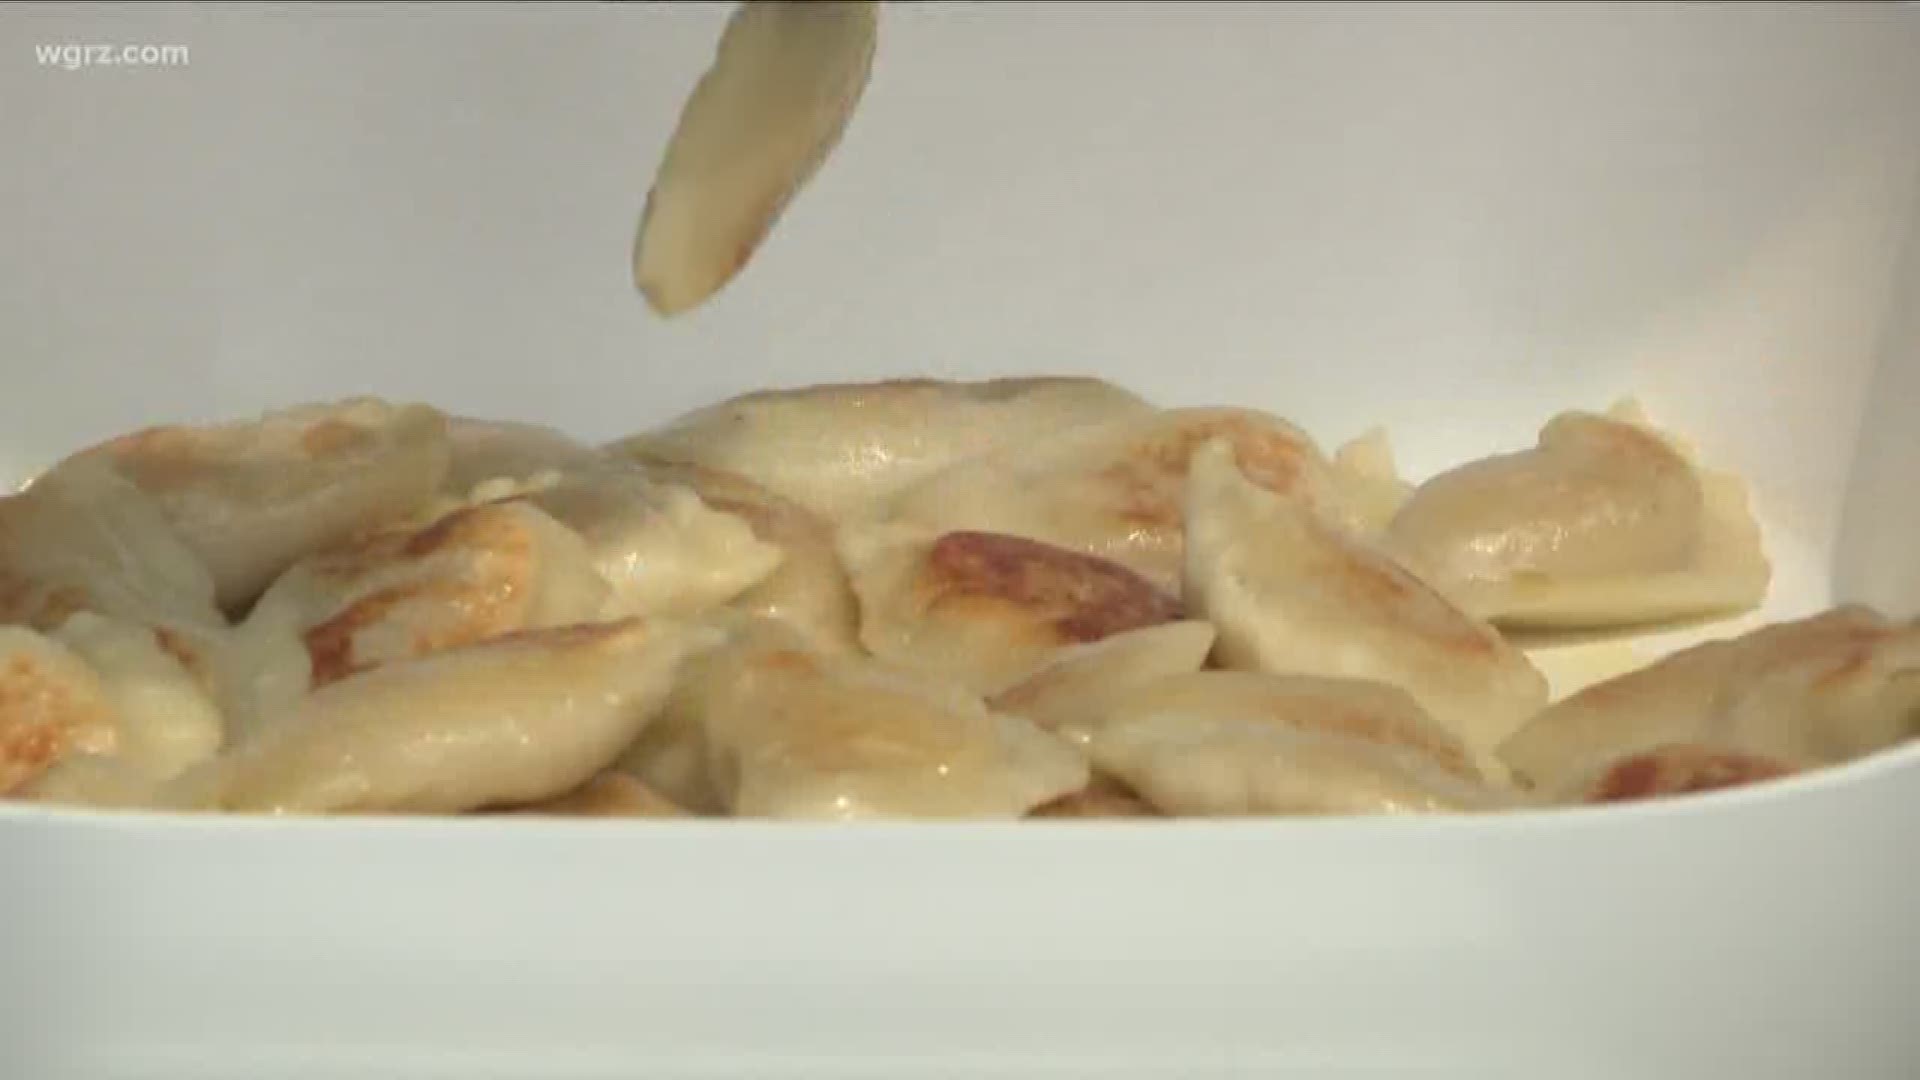 15 percent of all of their potato onion pierogi sales will fund pediatric cancer research and programs at Roswell.